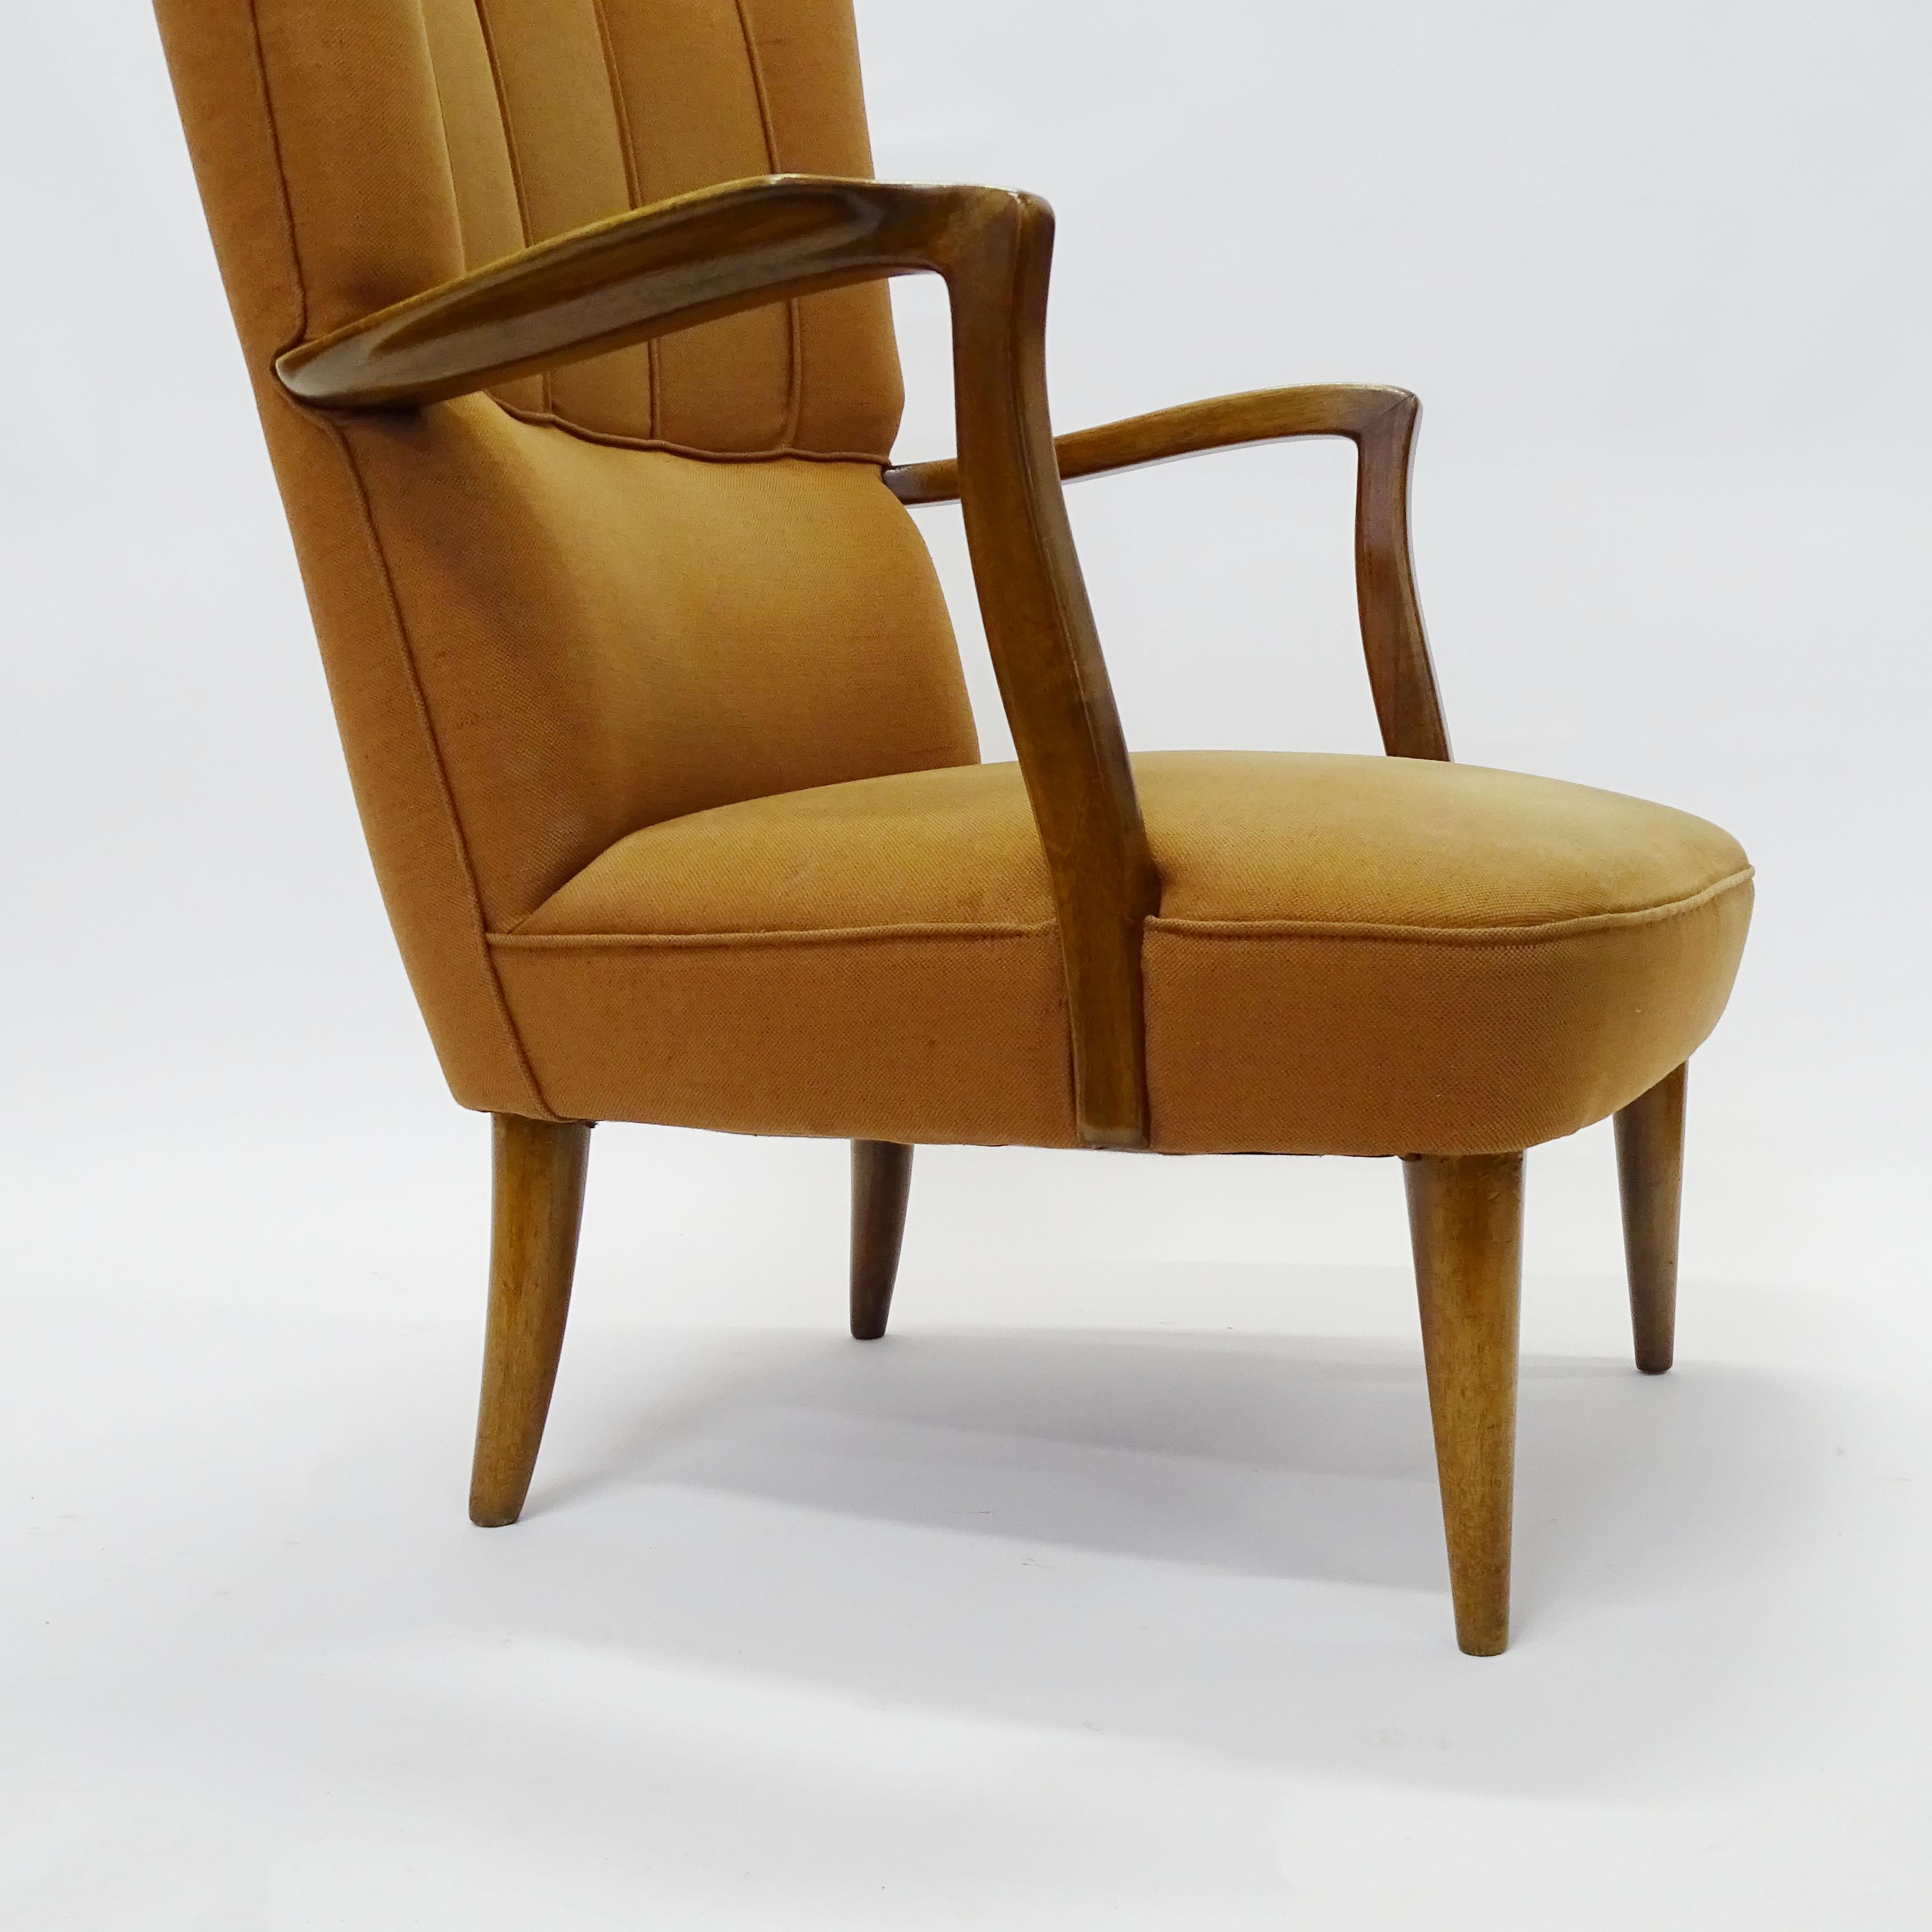 Paolo Buffa high back armchairs in original ochre upholstery, Italy 1940s.
 